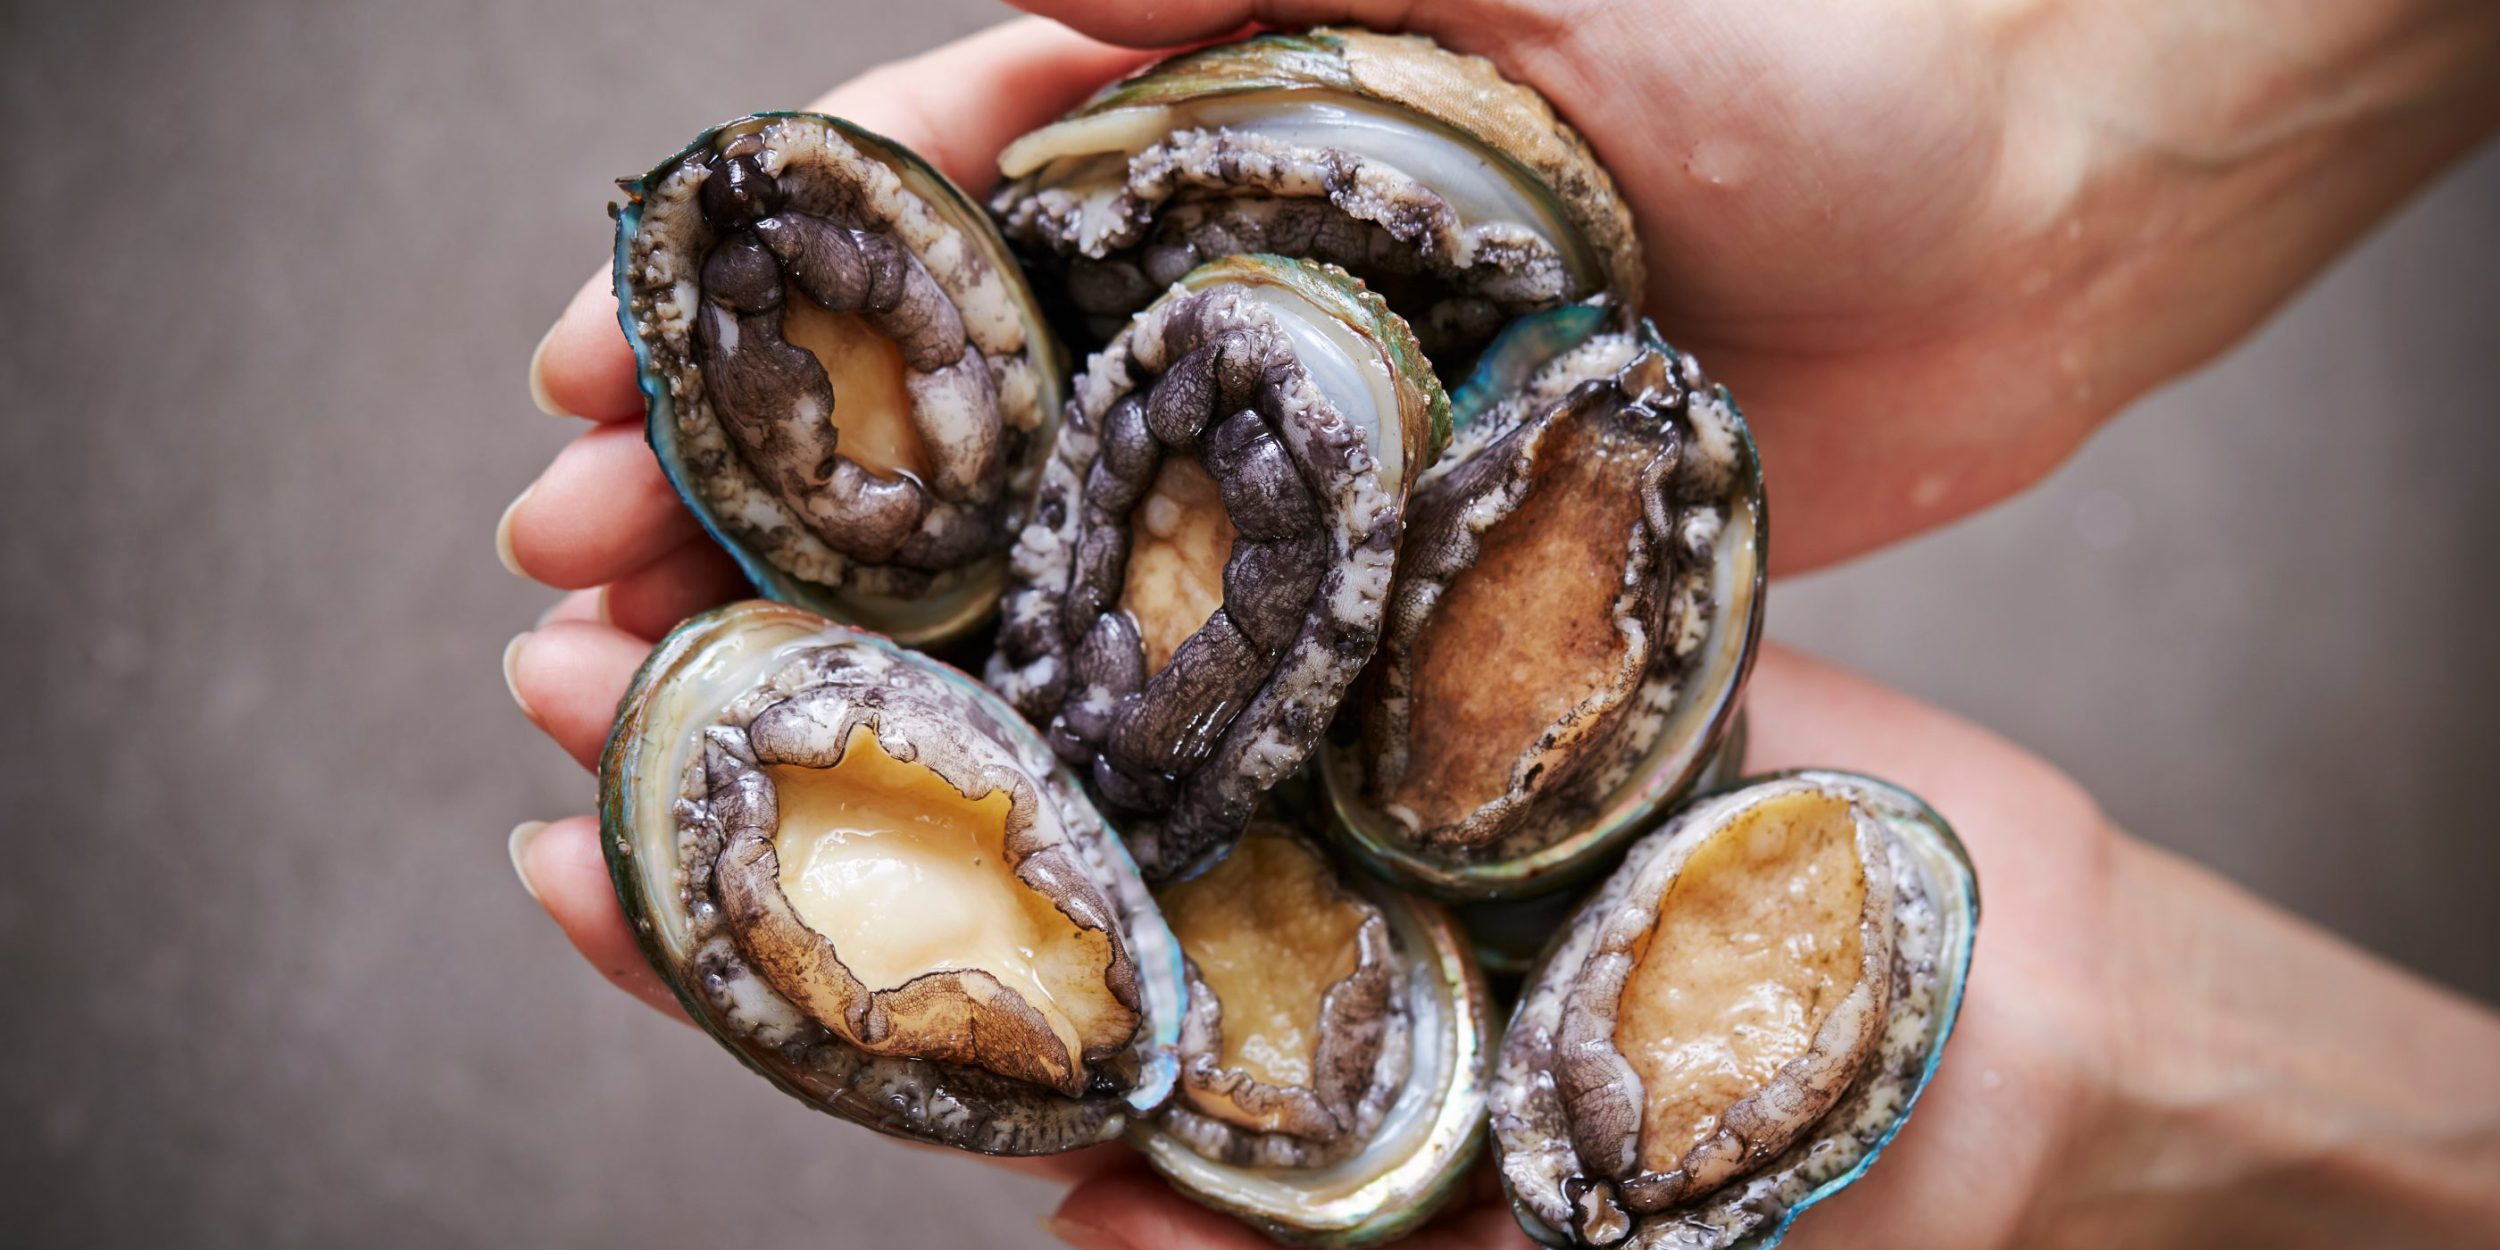 What Exactly Is Abalone And How Do You Eat It?